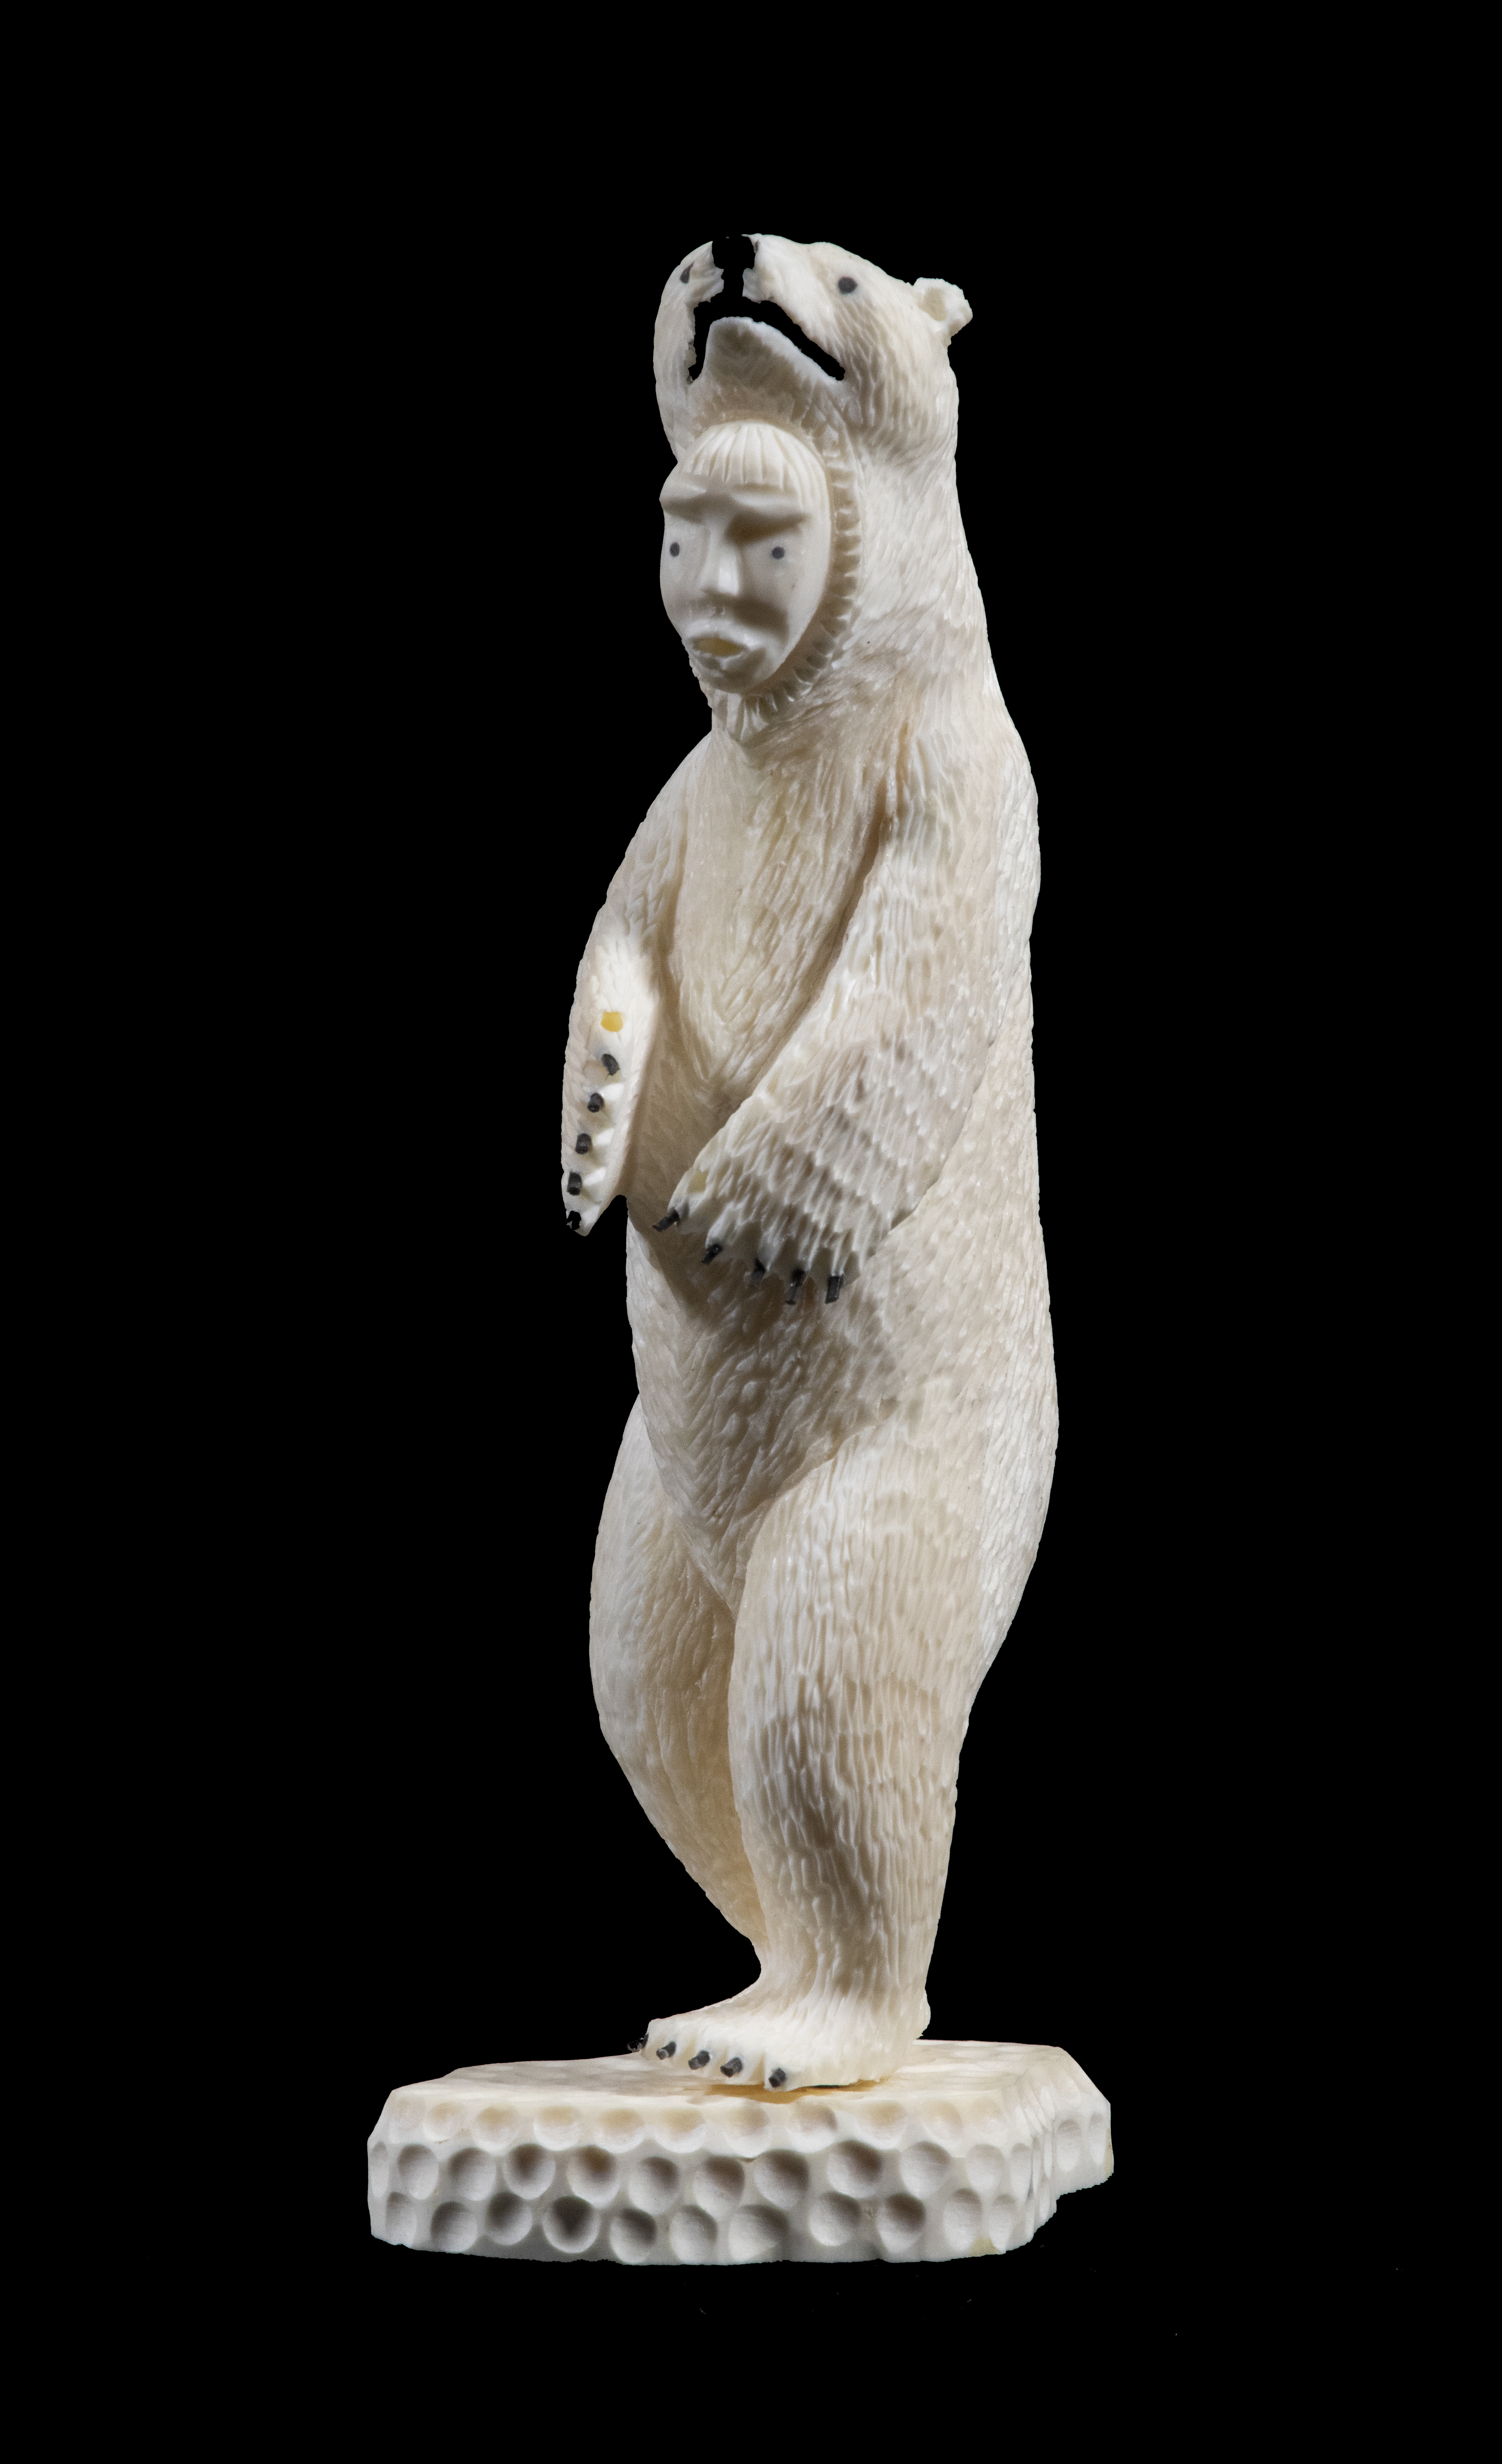 INUIT CARVING OF A SHAMAN BY HANK 2b1d75